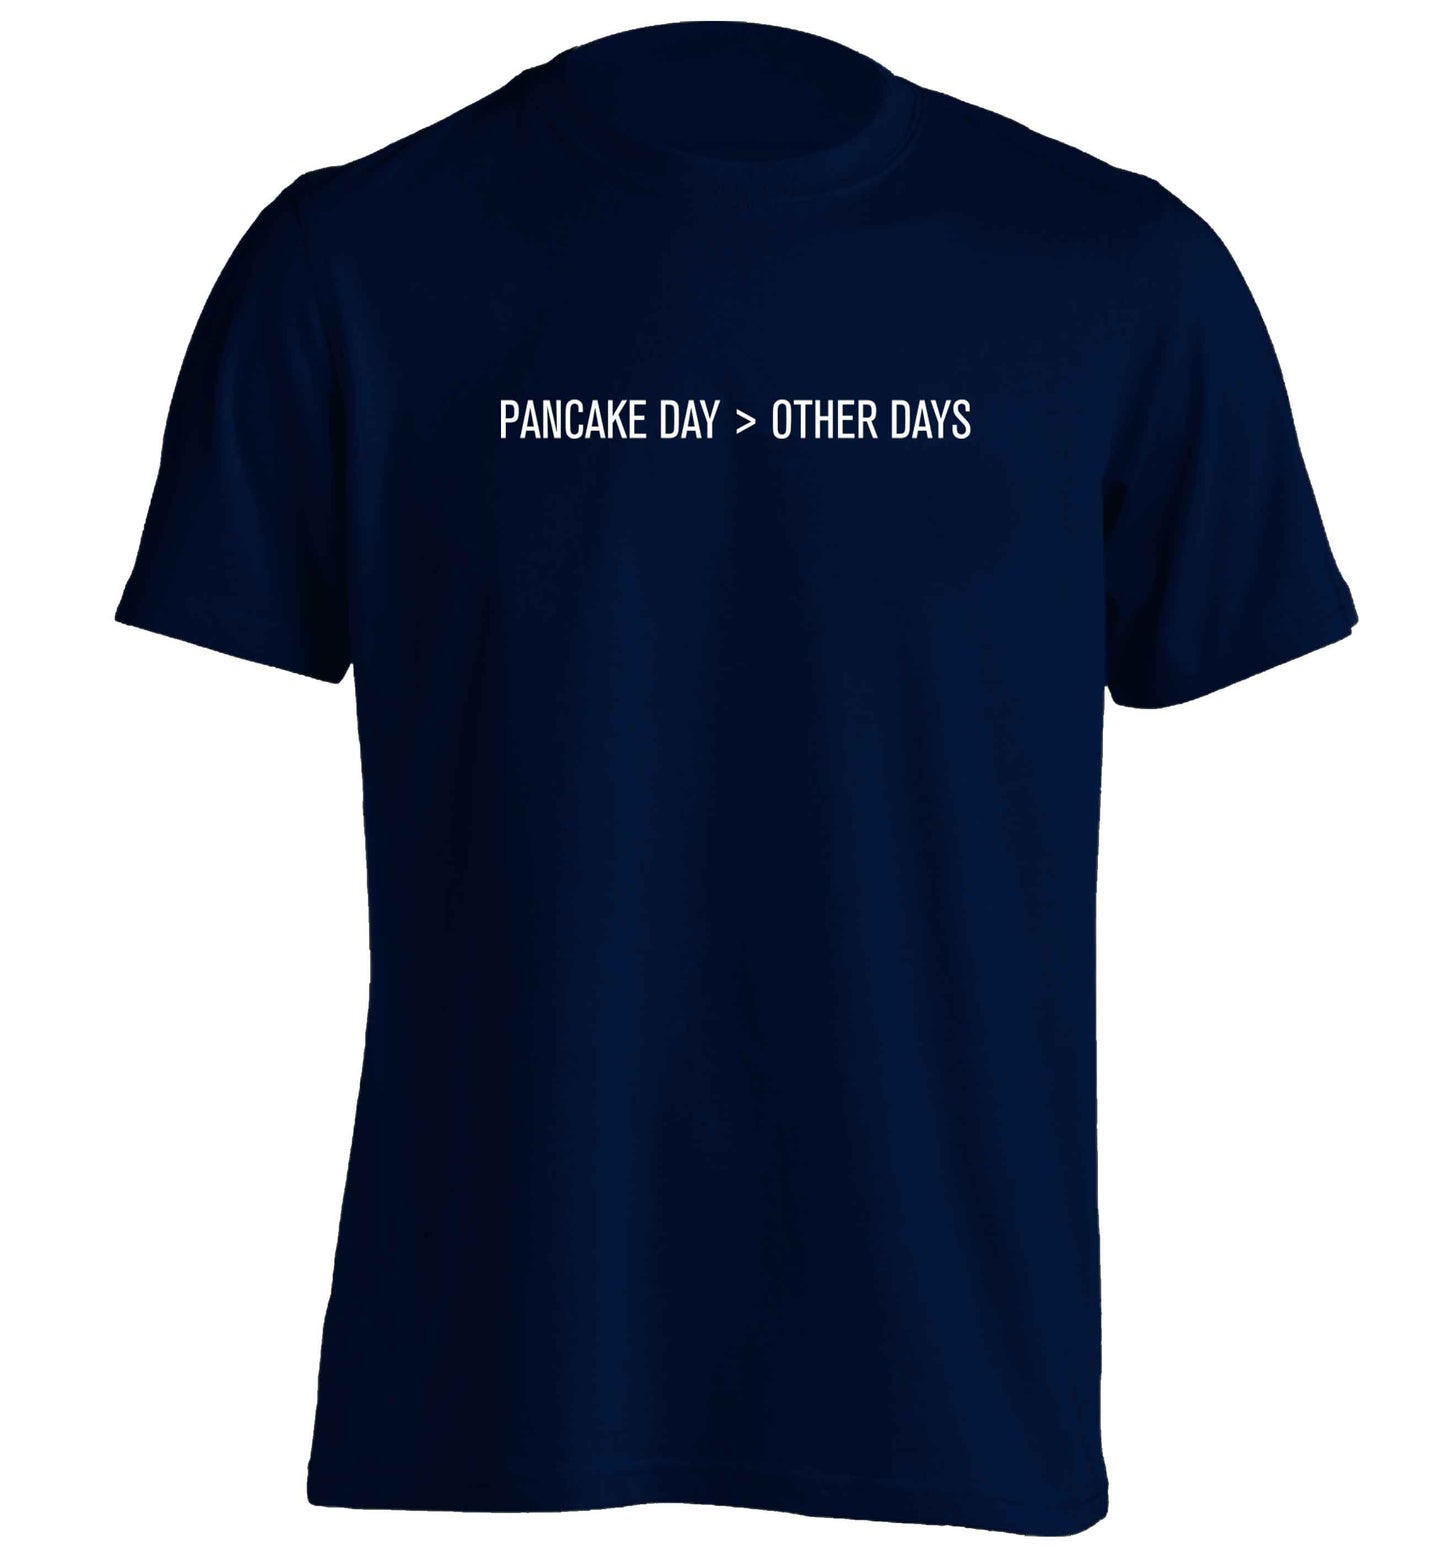 Pancake day > other days adults unisex navy Tshirt 2XL